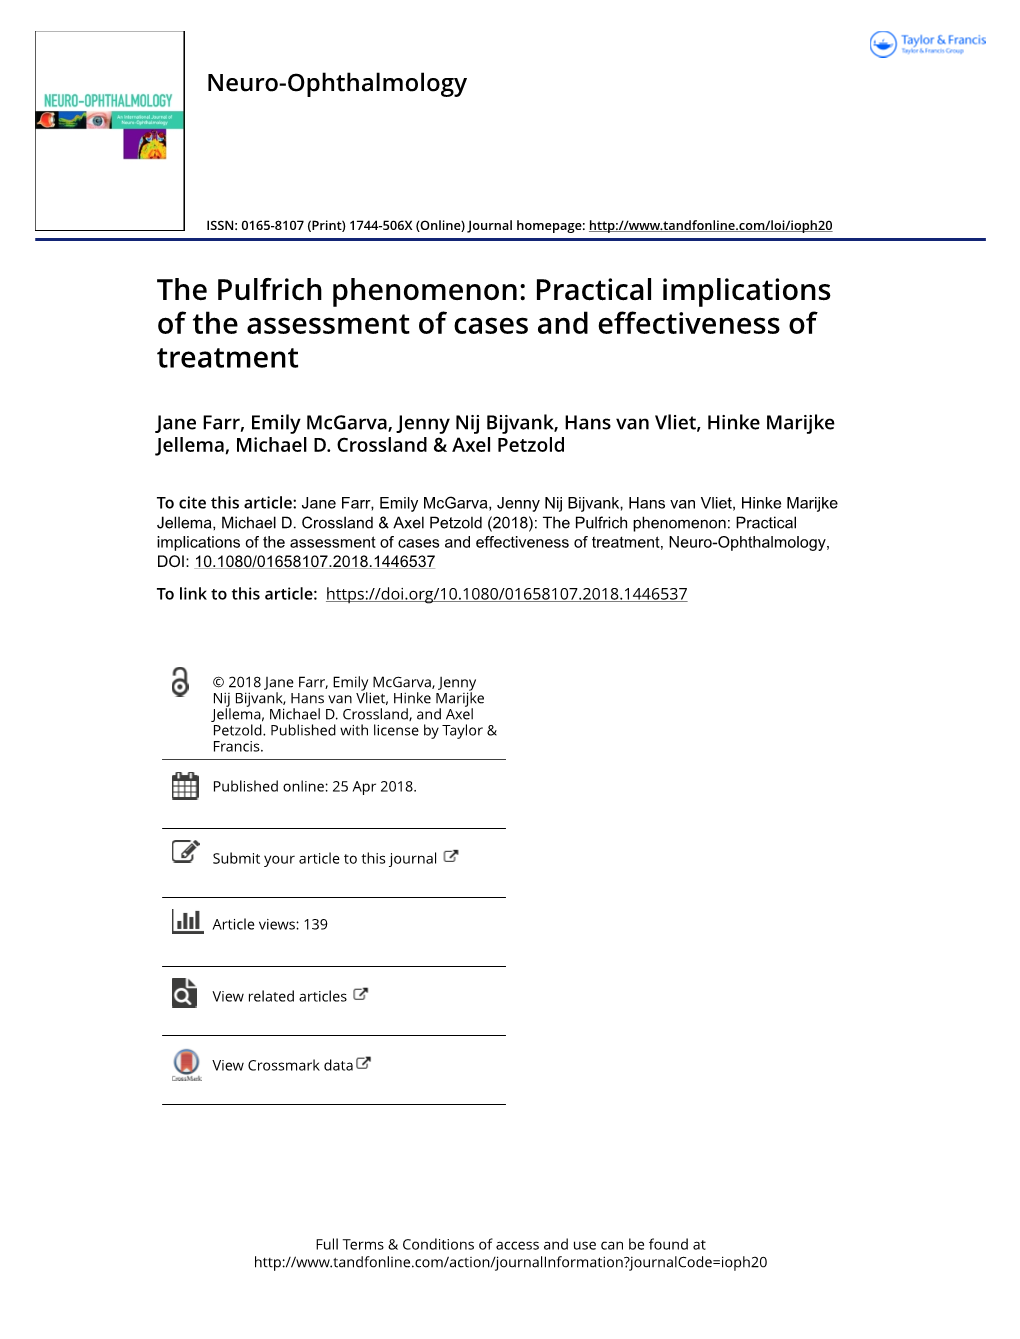 The Pulfrich Phenomenon: Practical Implications of the Assessment of Cases and Effectiveness of Treatment